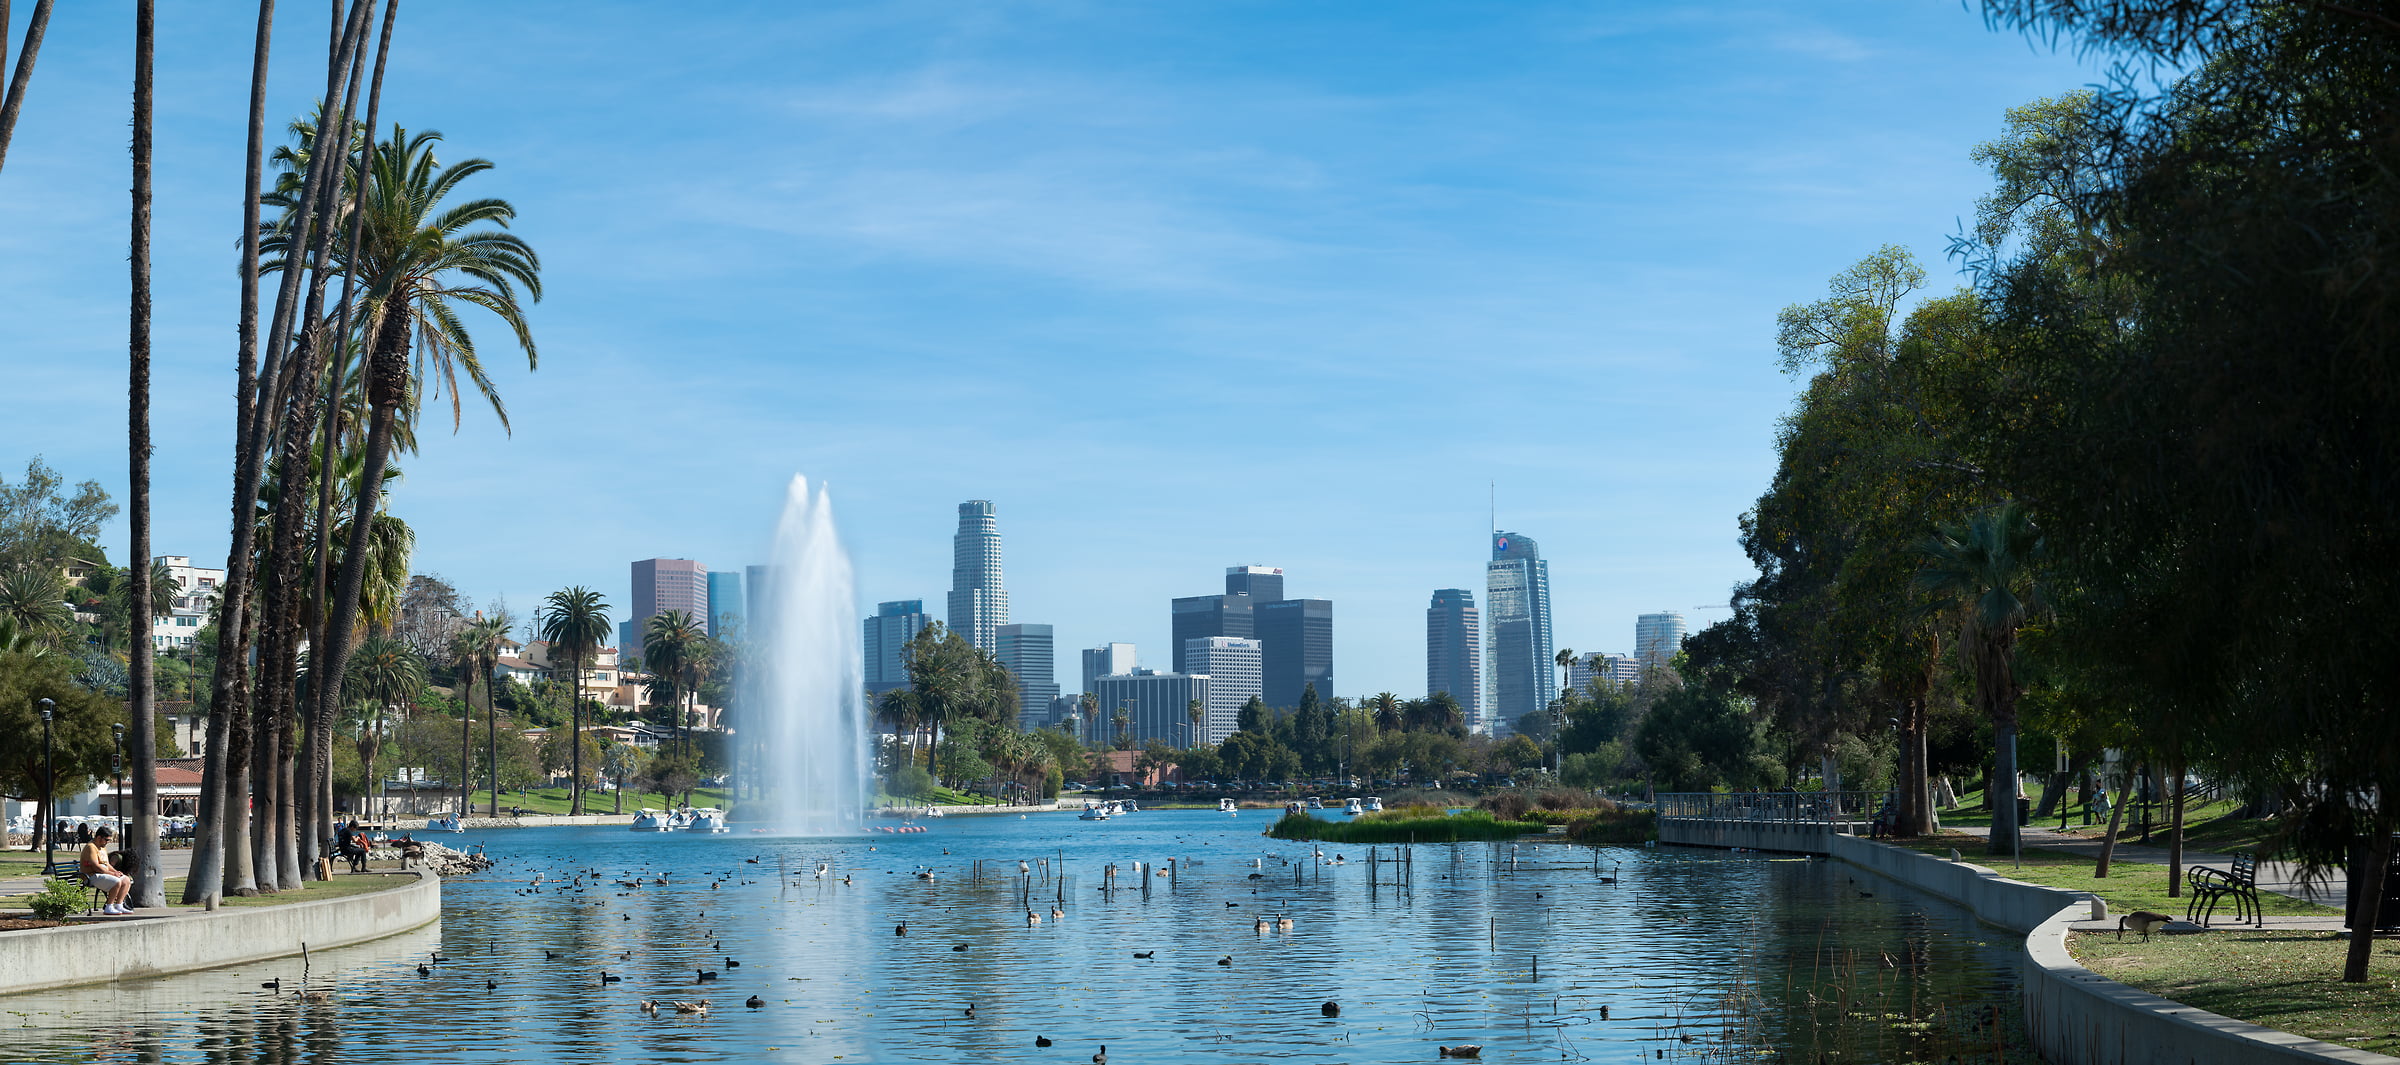 303 megapixels! A very high resolution, large-format VAST photo print of Echo Park in los Angeles; photograph created by Greg Probst in Los Angeles, California.